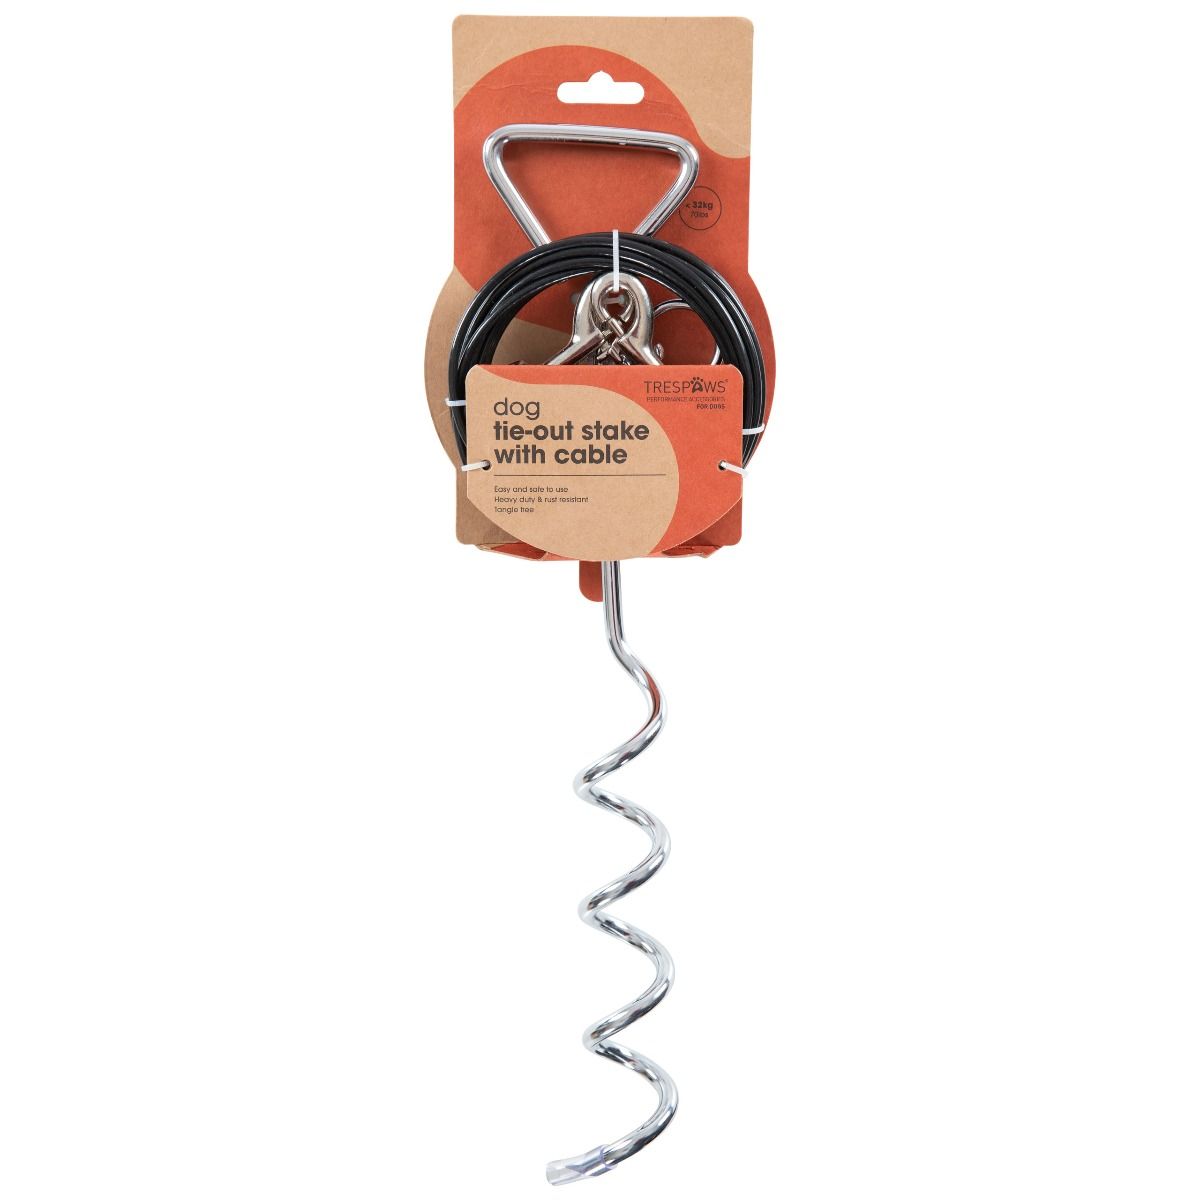 Trespaws Dog Tether And Tie Out Cable